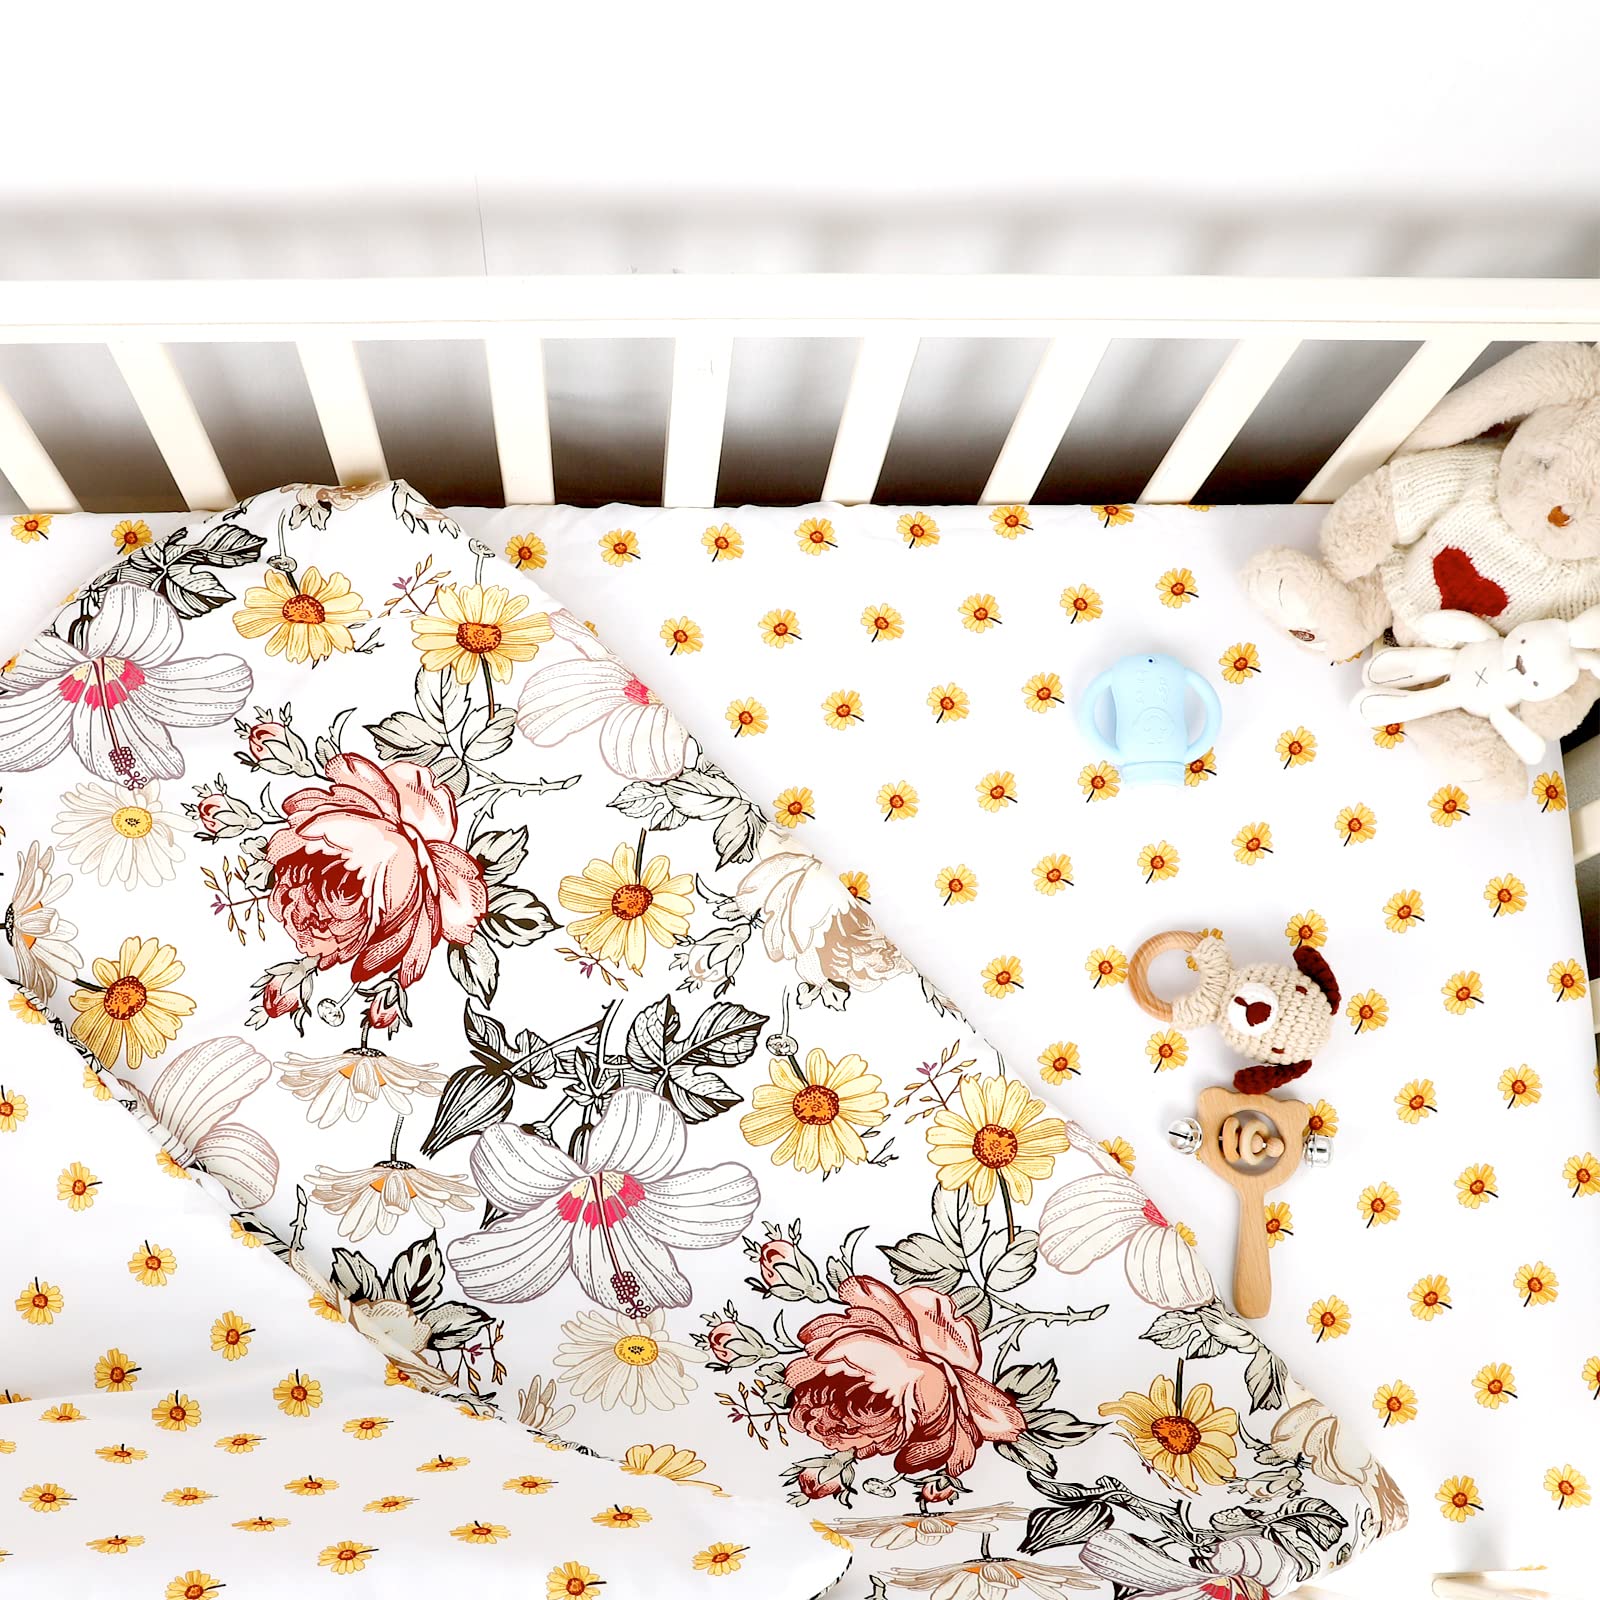 HNHUAMING 4-Piece Crib Bedding Set, Baby Girl Bedding Crib Set, Flower Crib Skirt, Baby Quilt, Crib Sheet and Diaper Stacker